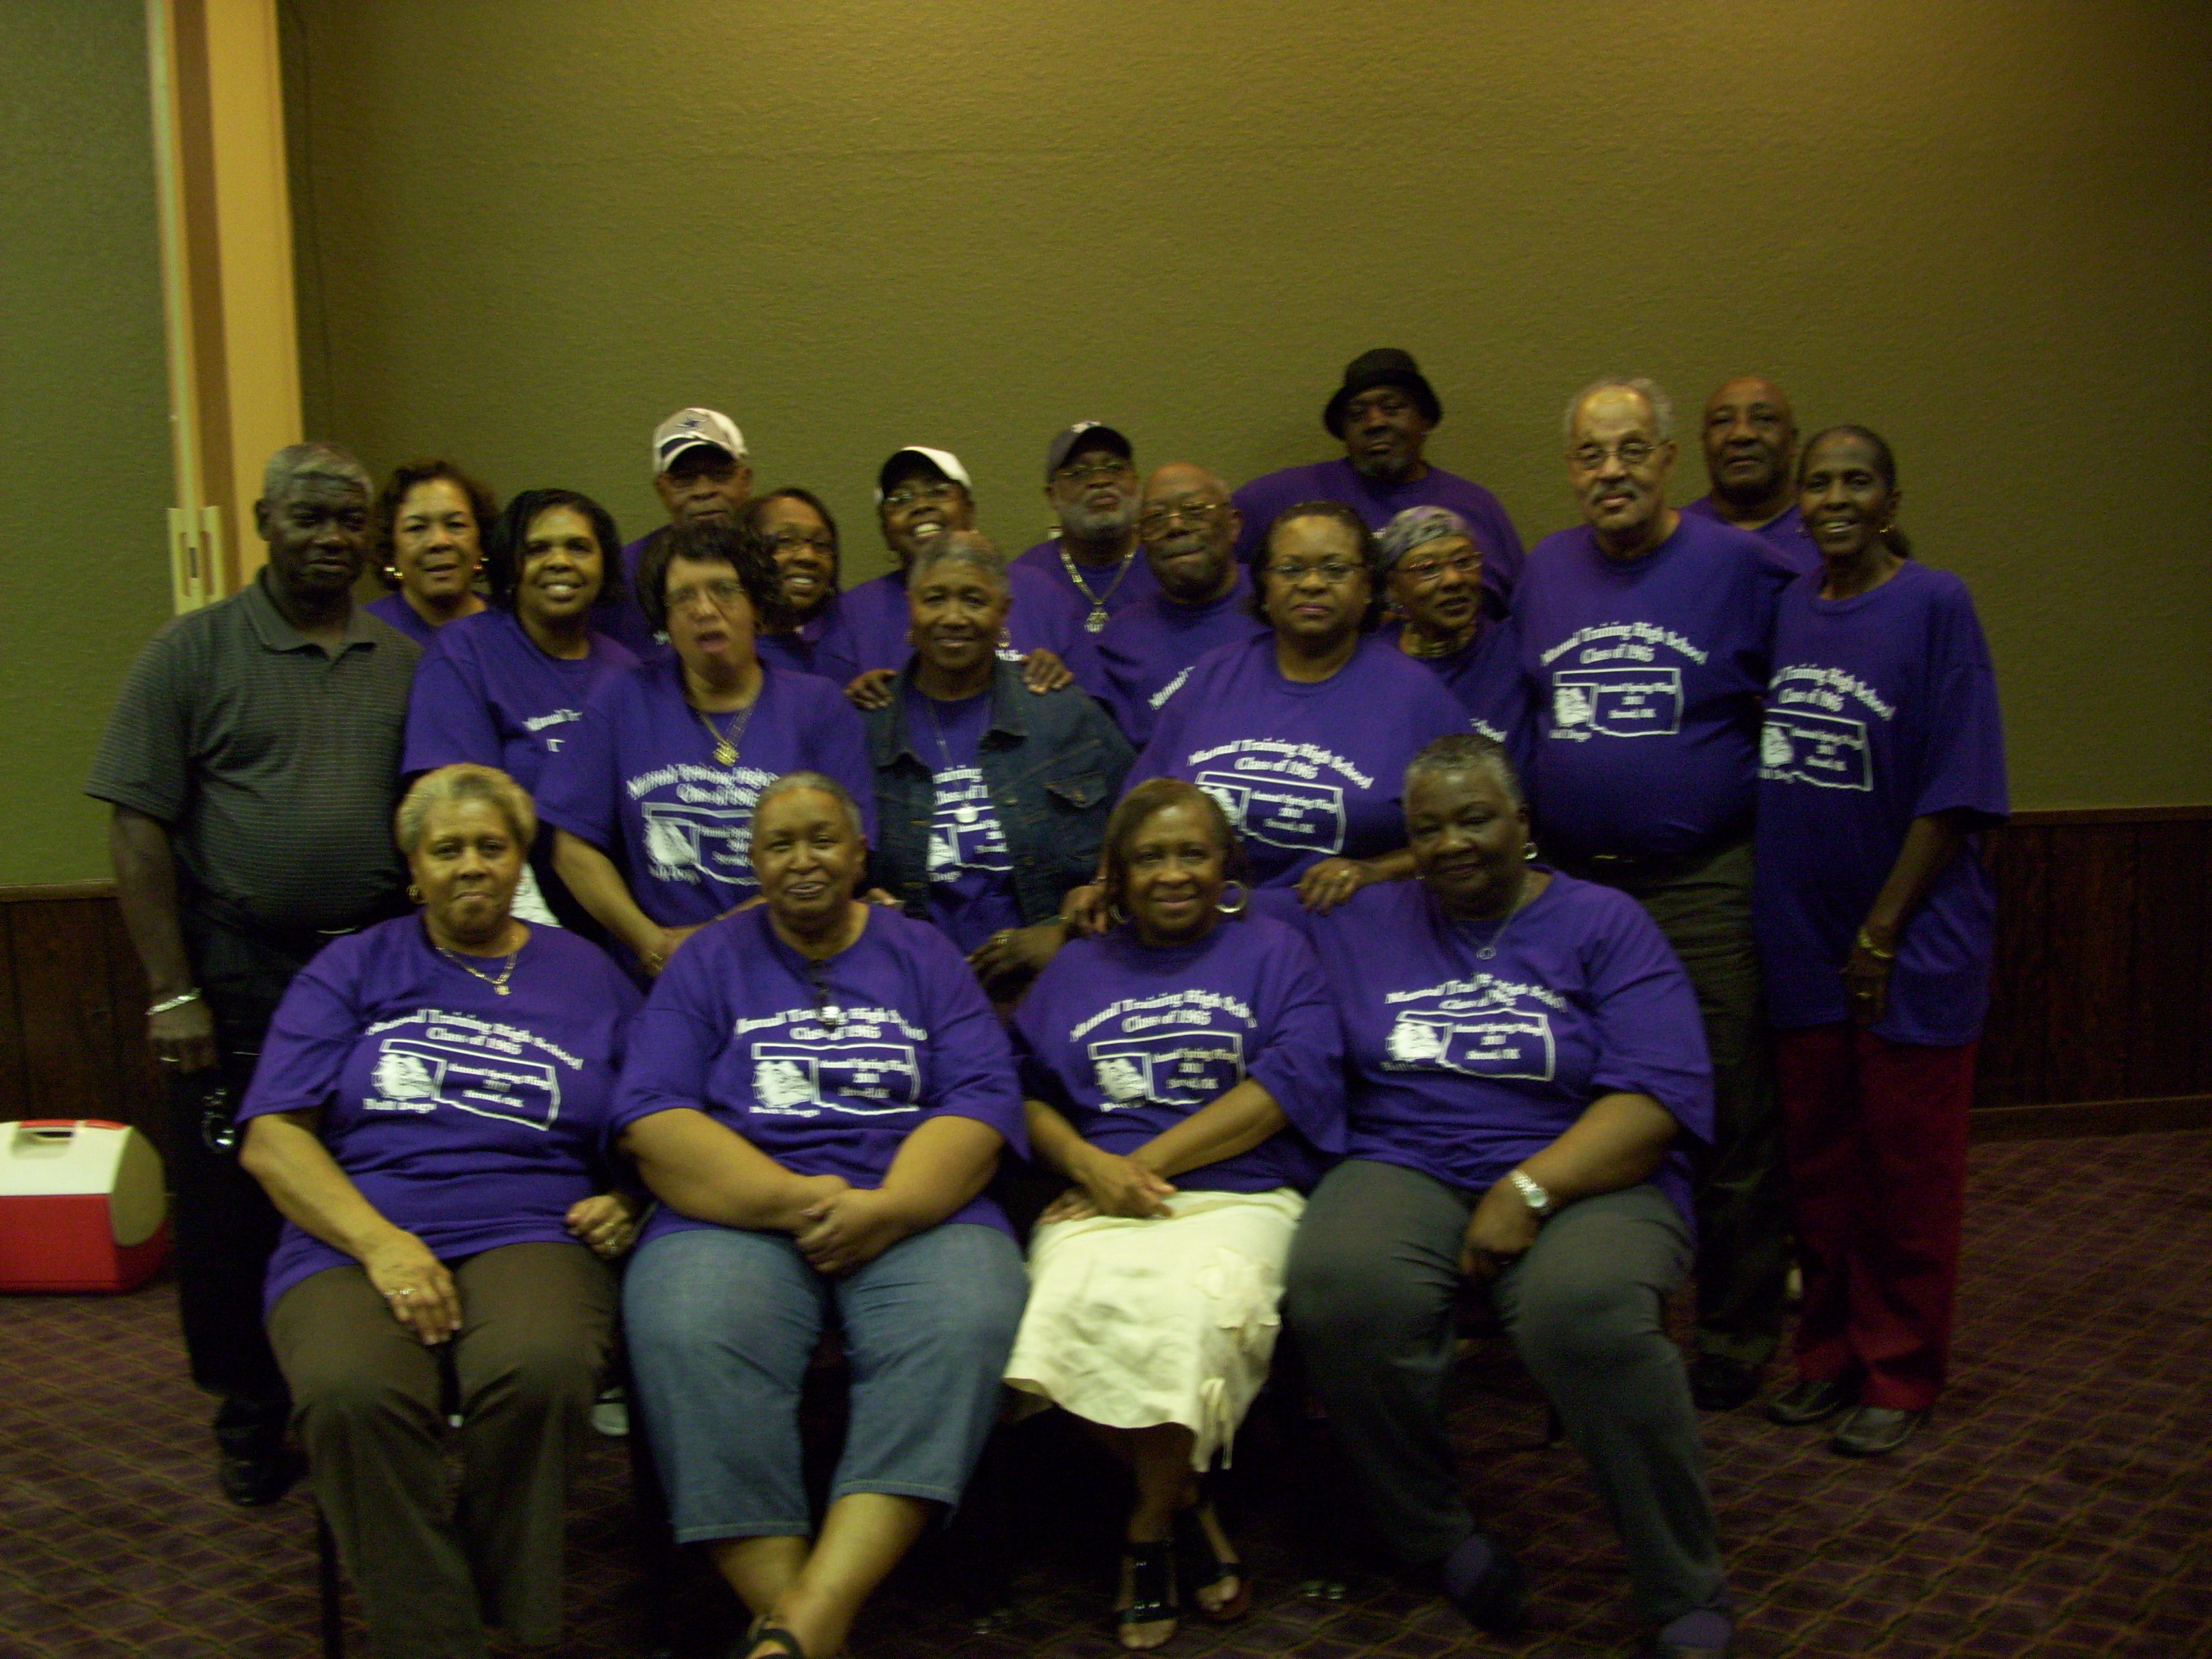 We found our leader...
Seated left to right: Joyce Chairs, Helen Phillips, Joice Rivers,
Frankye Sourie, Standing row 2 left to right:  Elvertta Wells, Carolyn McFrazier, Collotta Gray, Row 3 left to right: Porter Briggs, Arthalia Wilkerson, Shirley Cor